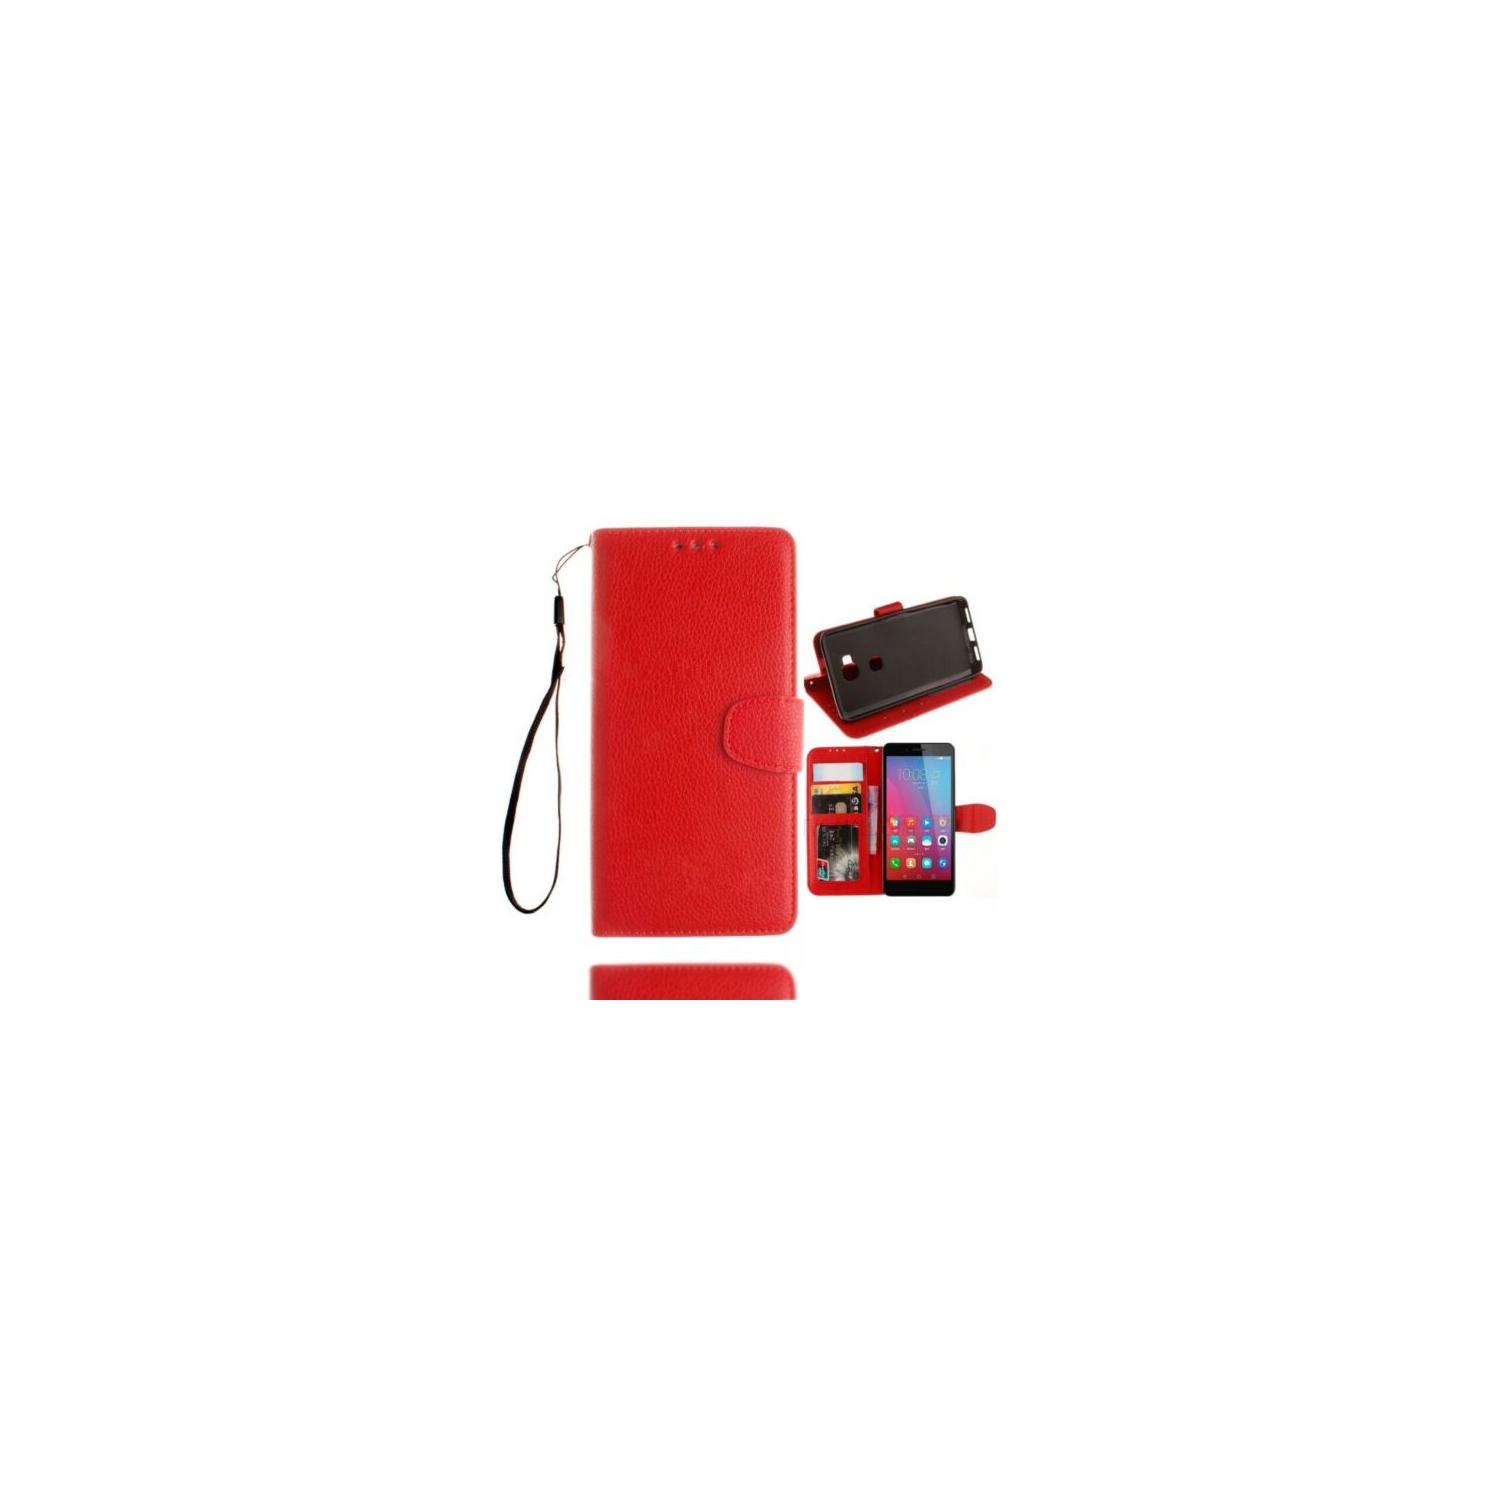 【CSmart】 Magnetic Card Slot Leather Folio Wallet Flip Case Cover for Huawei GR5 & Honor 5x, Red